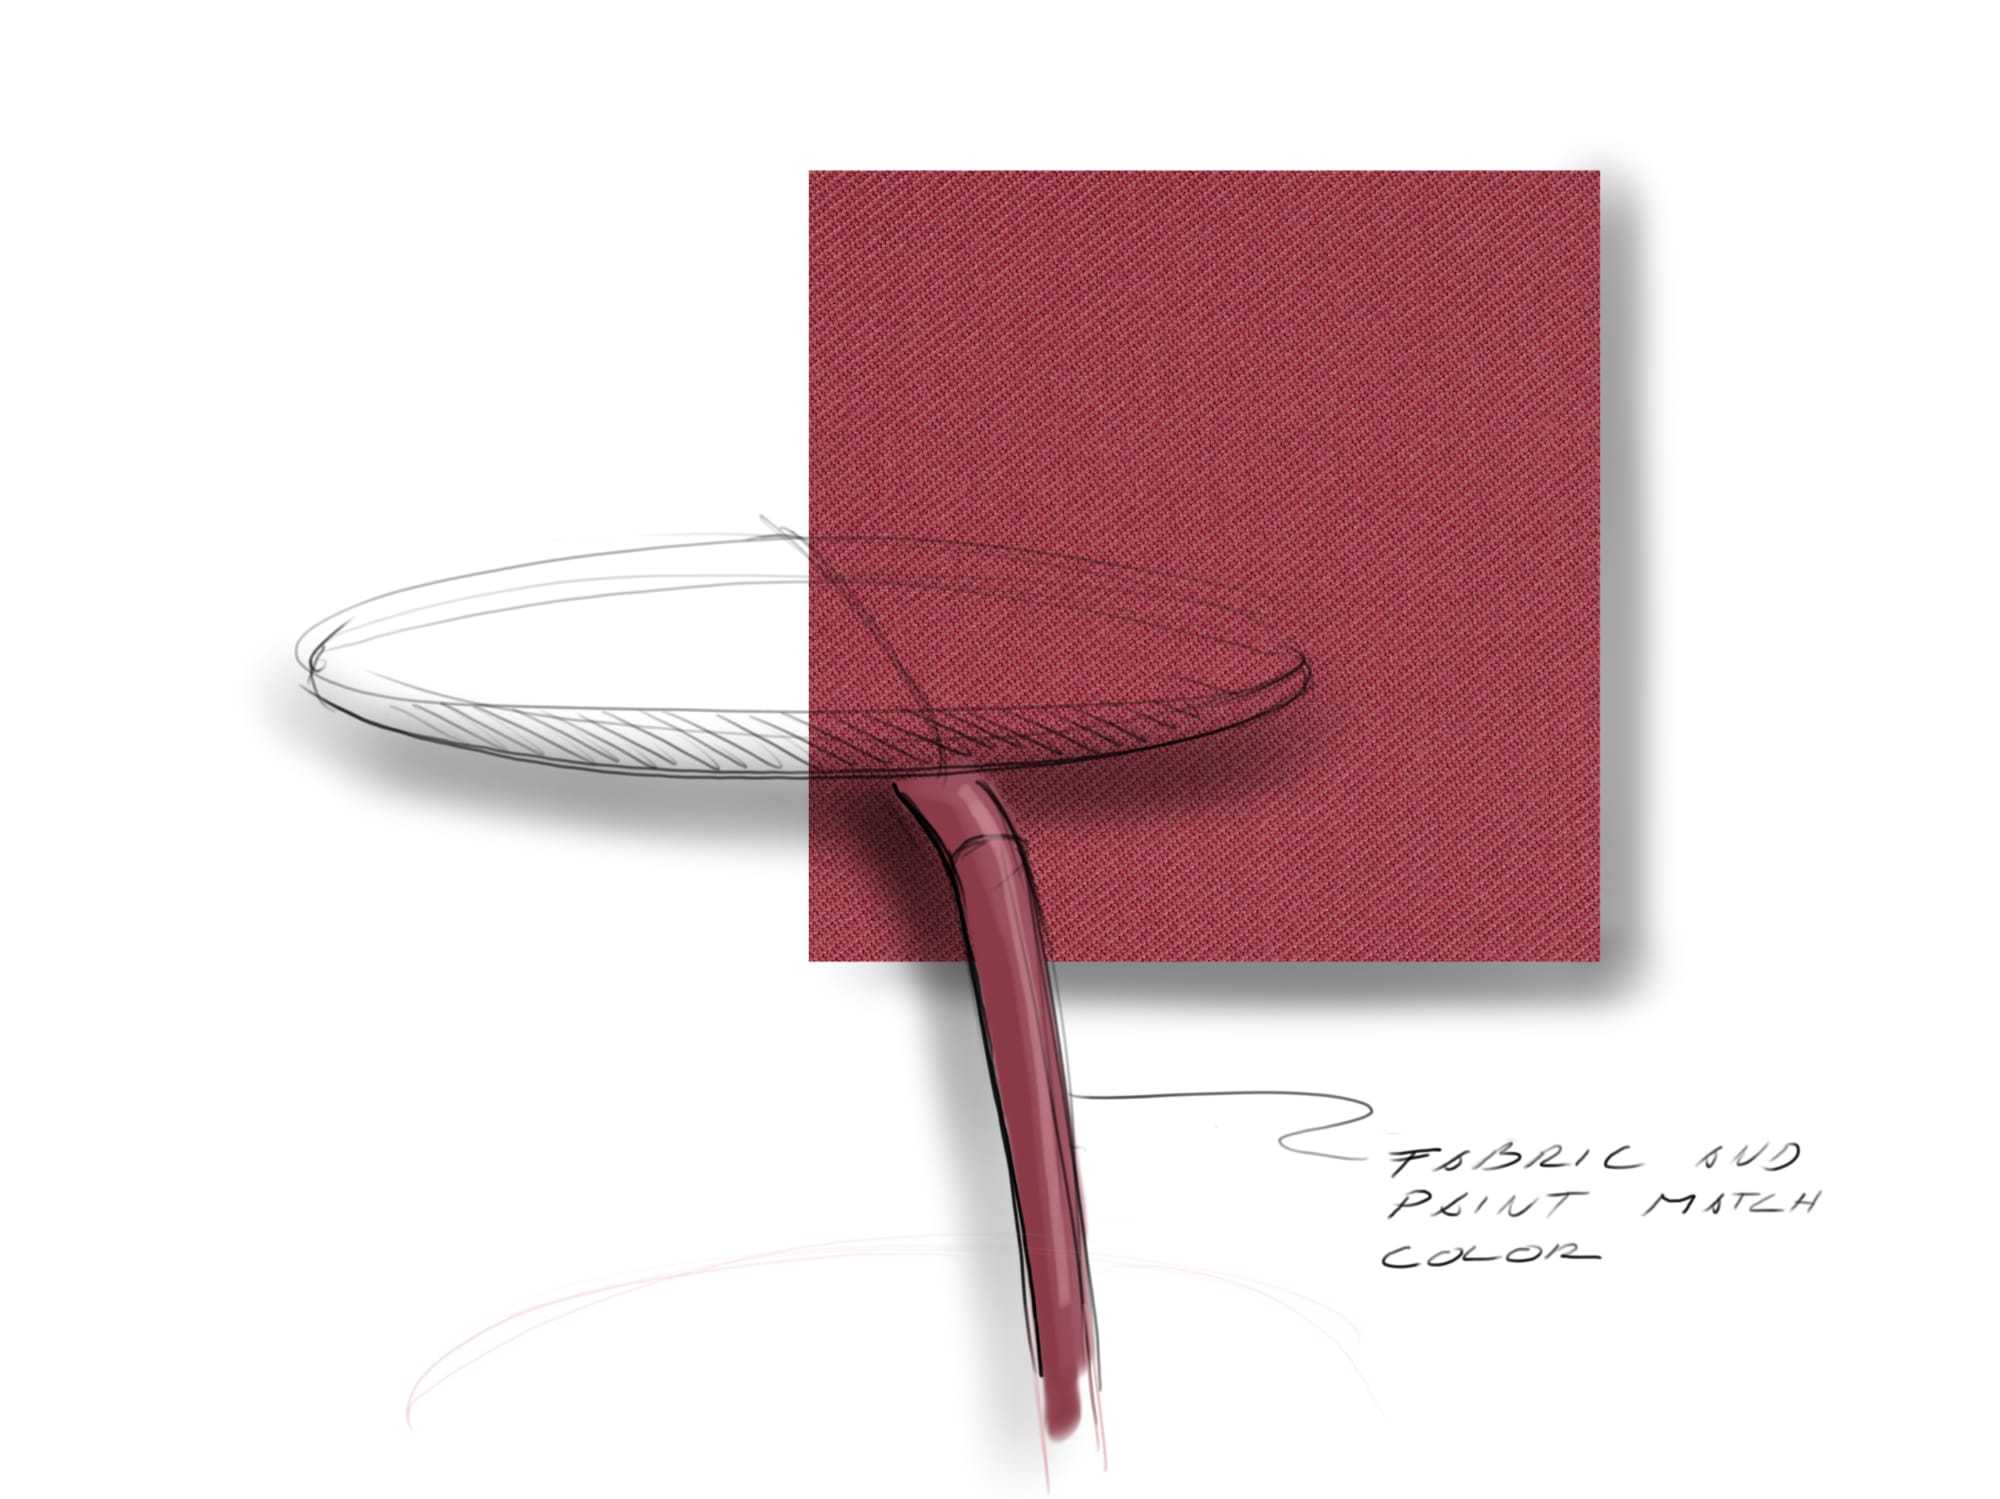 Sketch of Rocca stool with round seat cushion and bent steel tube support leg and dark red fabric sample in background